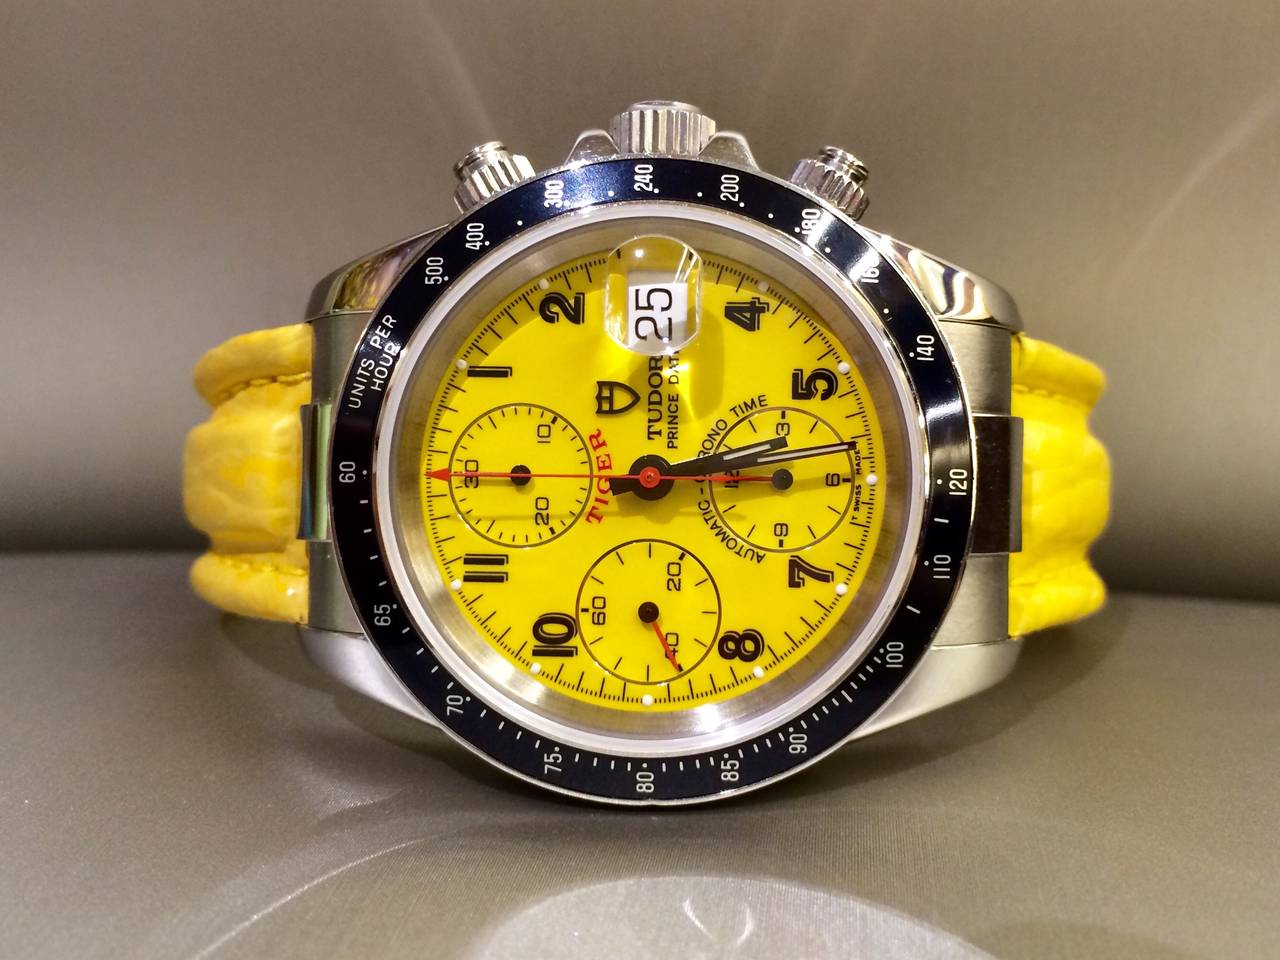 Tudor Tiger Prince Date Yellow Chronograph Wristwatch, Automatic Winding. Stainless Steel Case with Black Tachymeter 40mm Bezel. Yellow Dial with Black Arabic numerals; Hour, Minute and Second Recorders, Yellow Strap with Stainless Steel Tudor